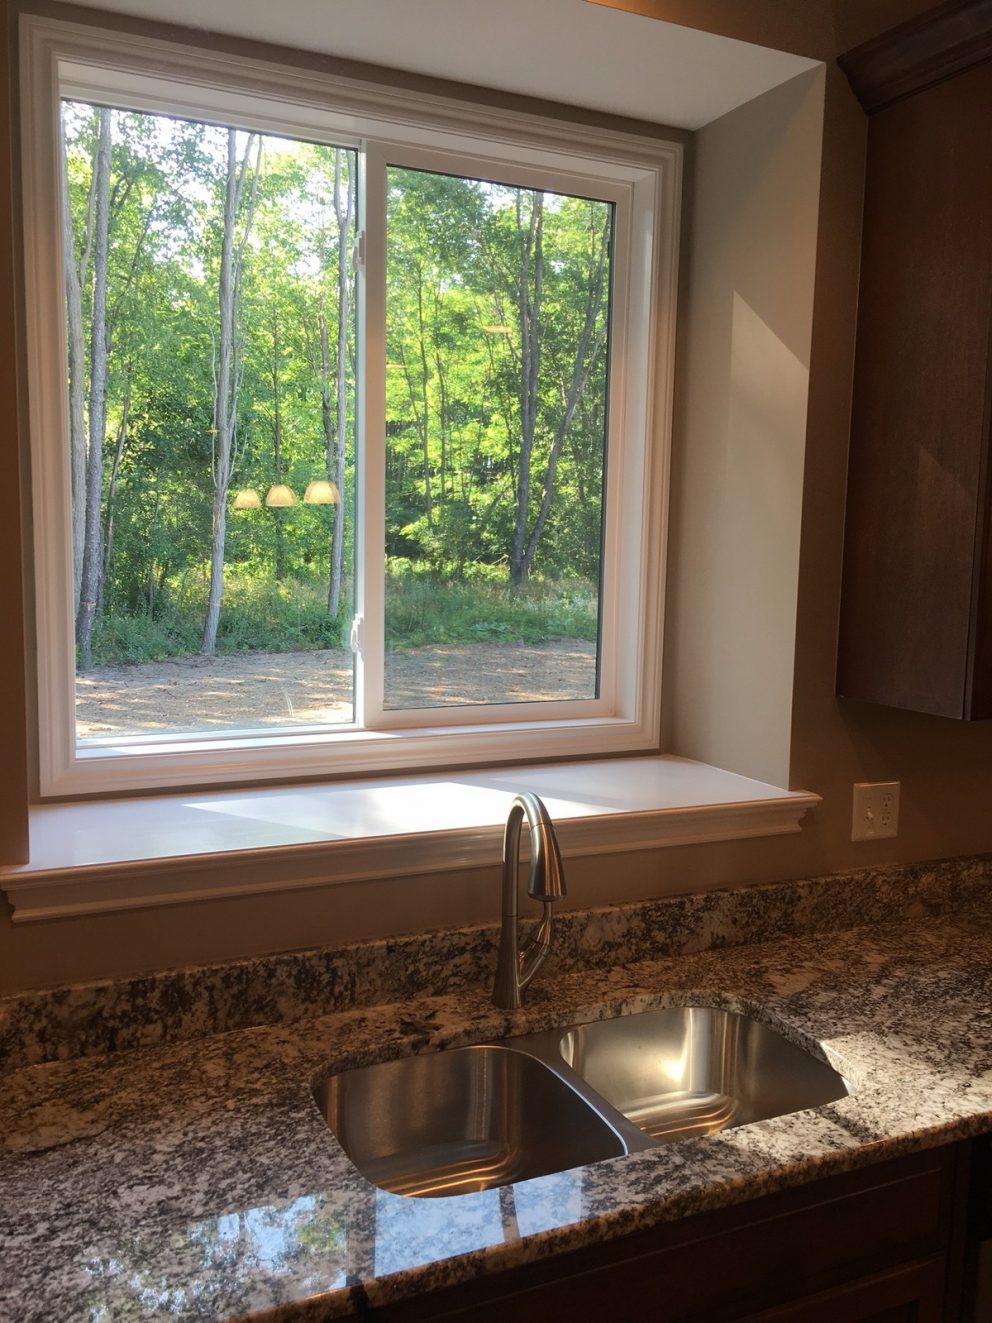 Stainless steel kitchen sink in granite counter top with bay window